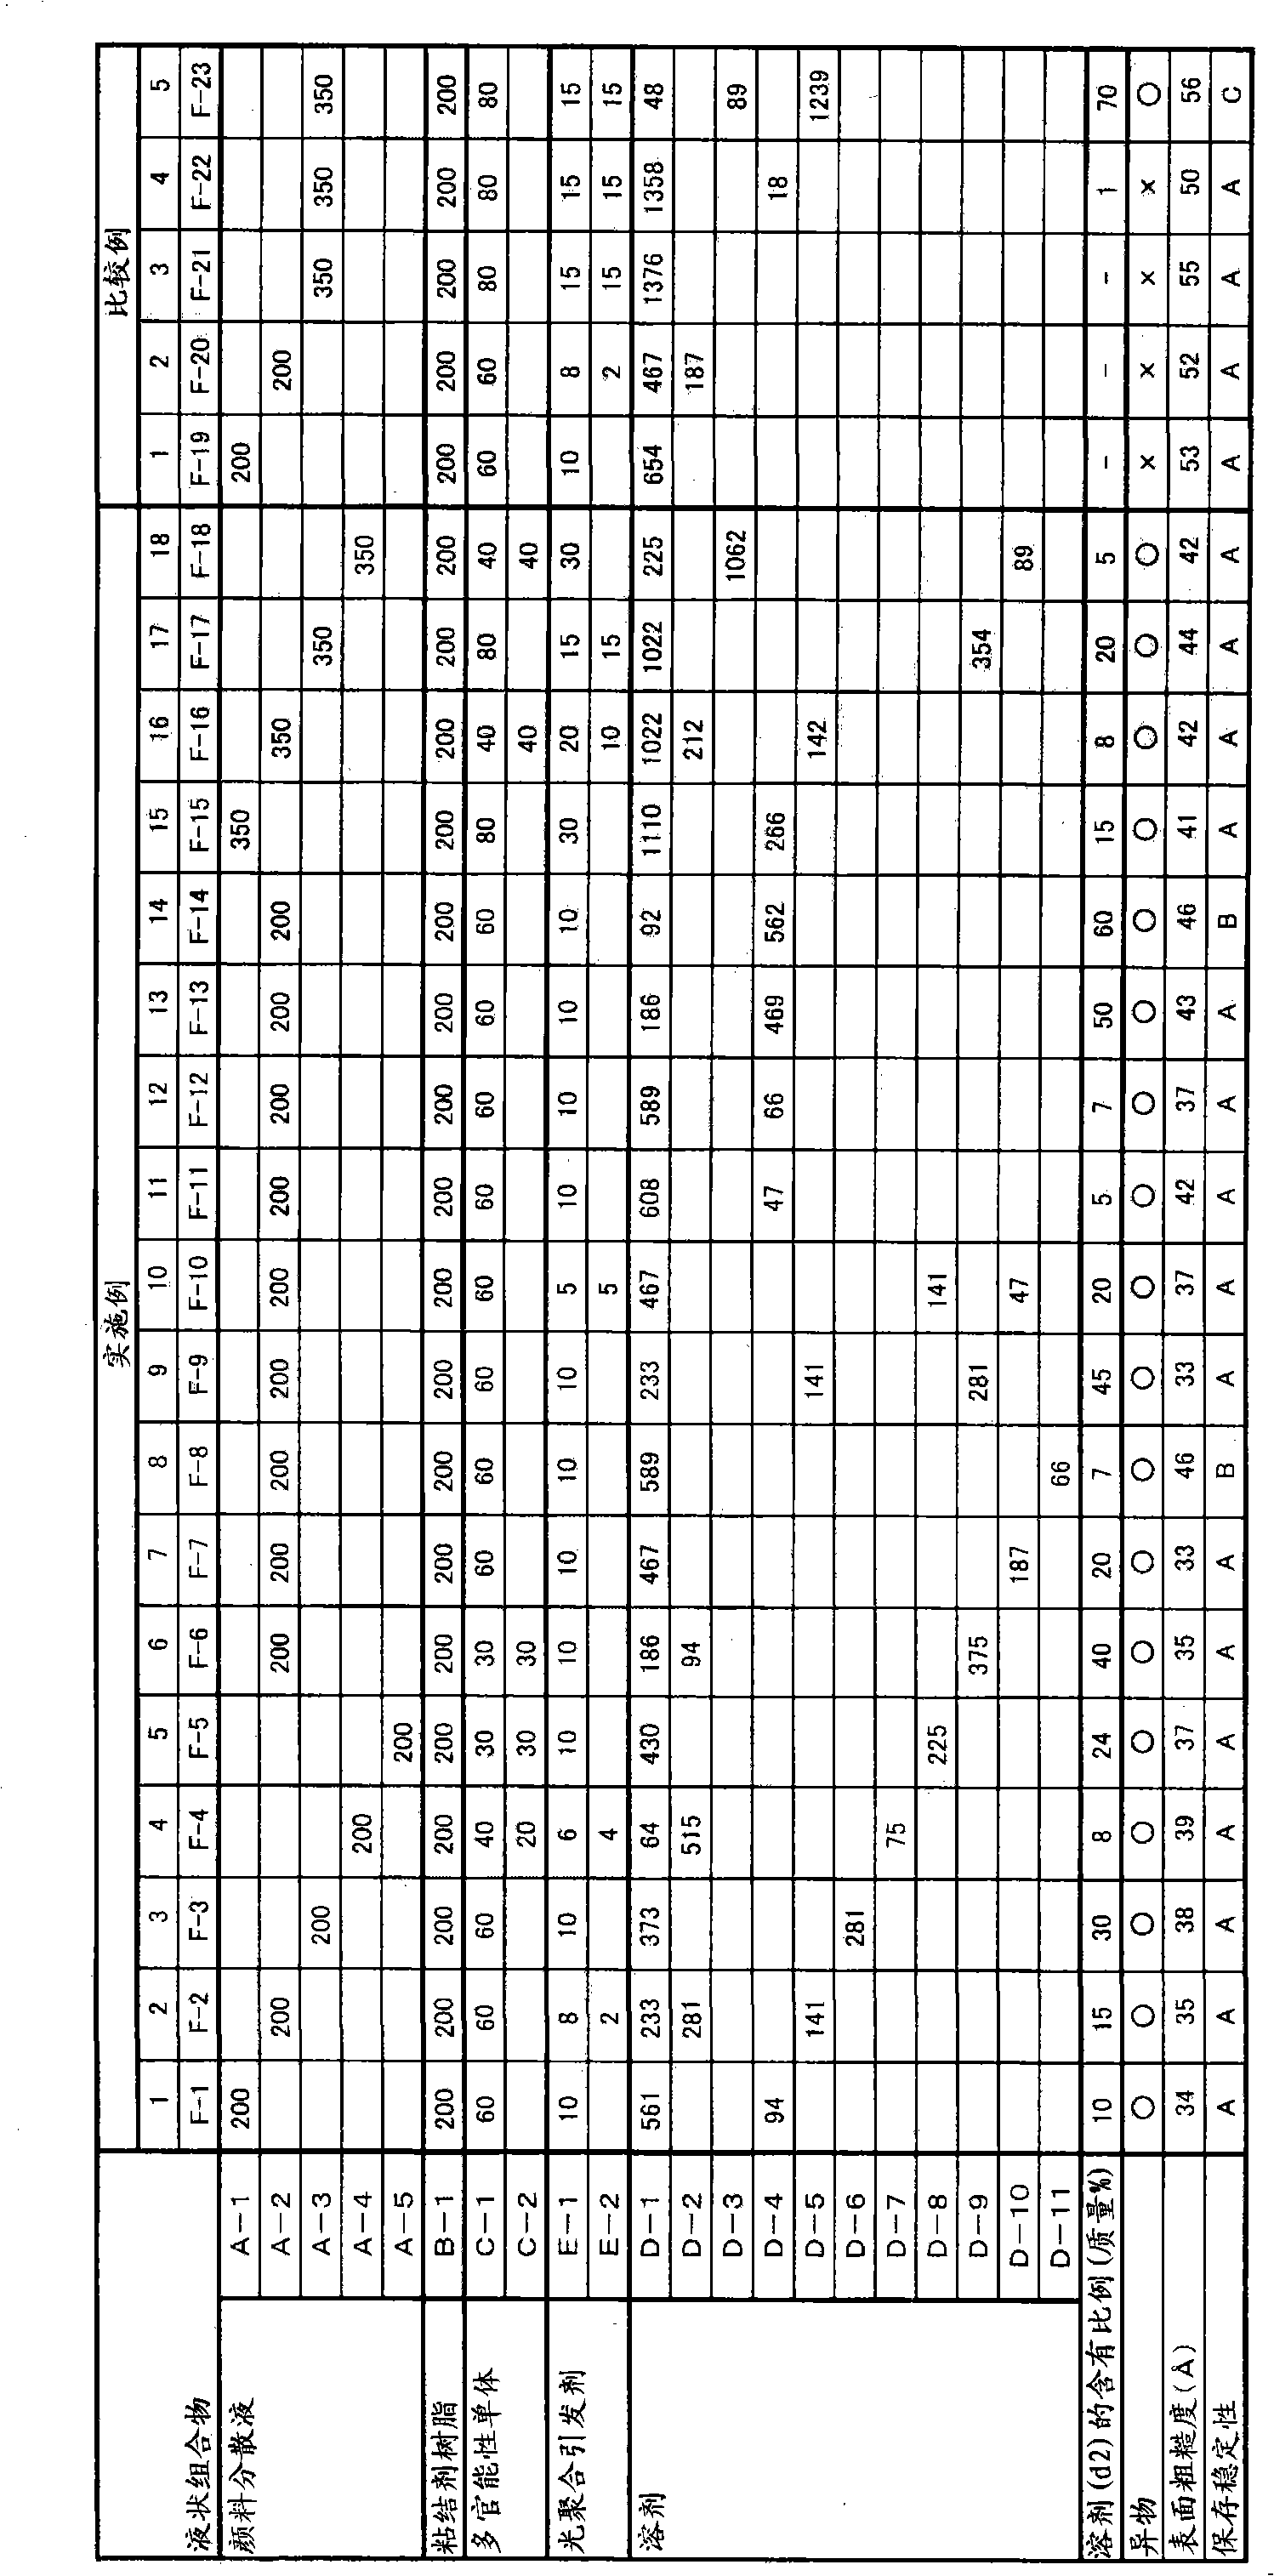 Coloring composition, color filter and color liquid crystal display device